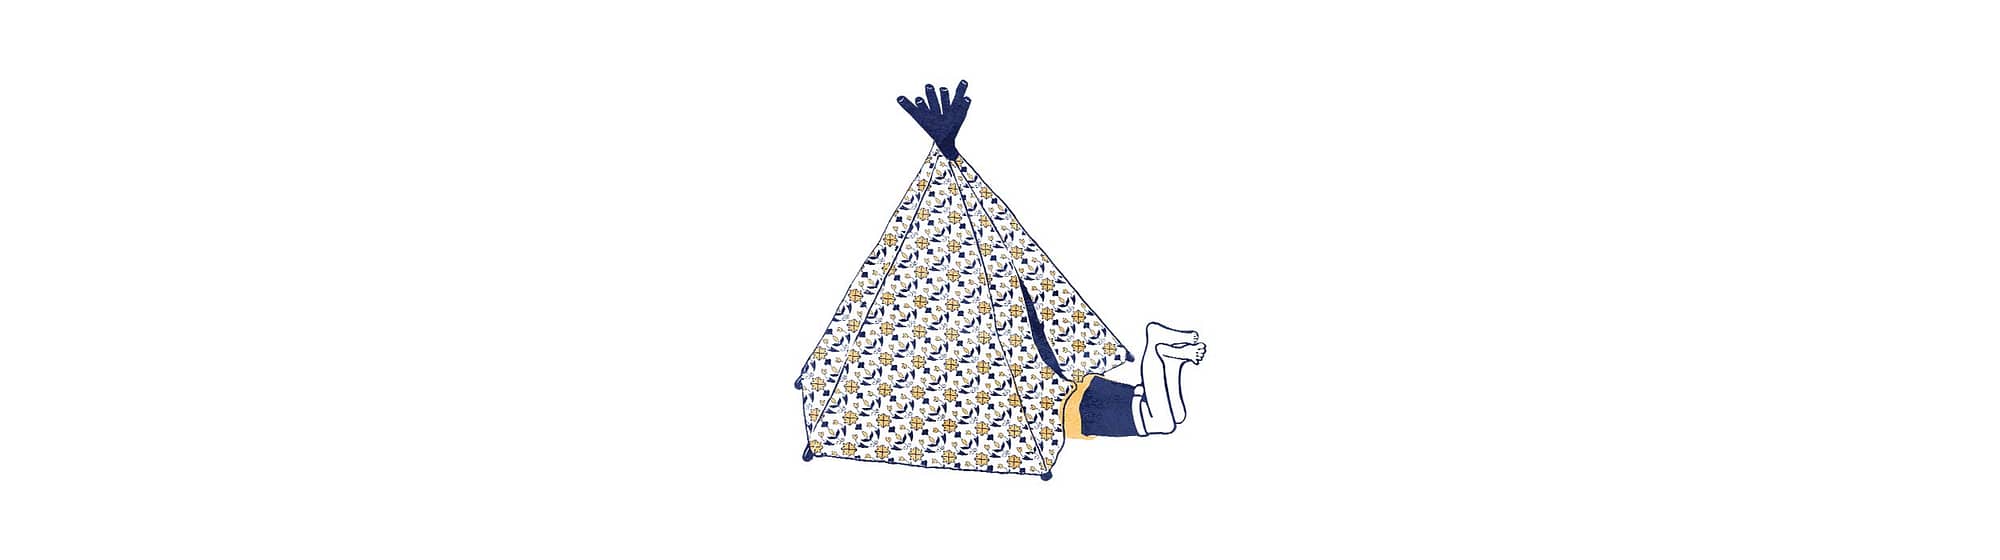 Reading-in-the-teepee